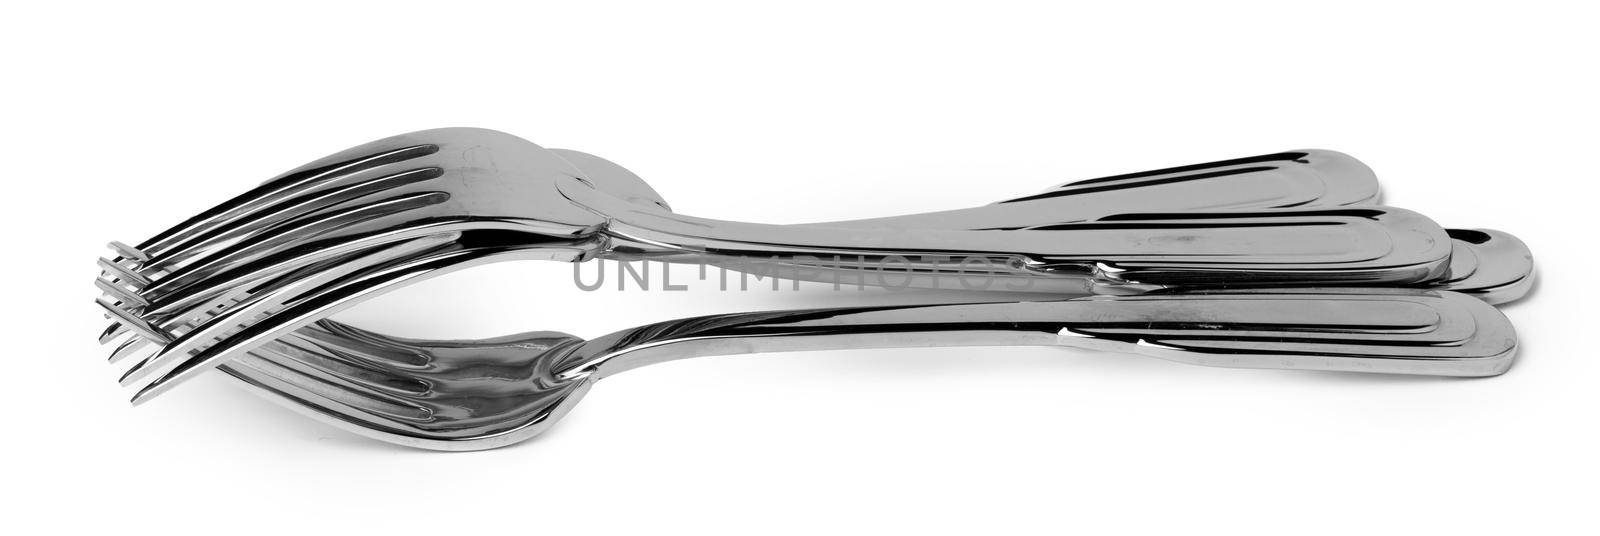 Set of new cutlery isolated on white background close up